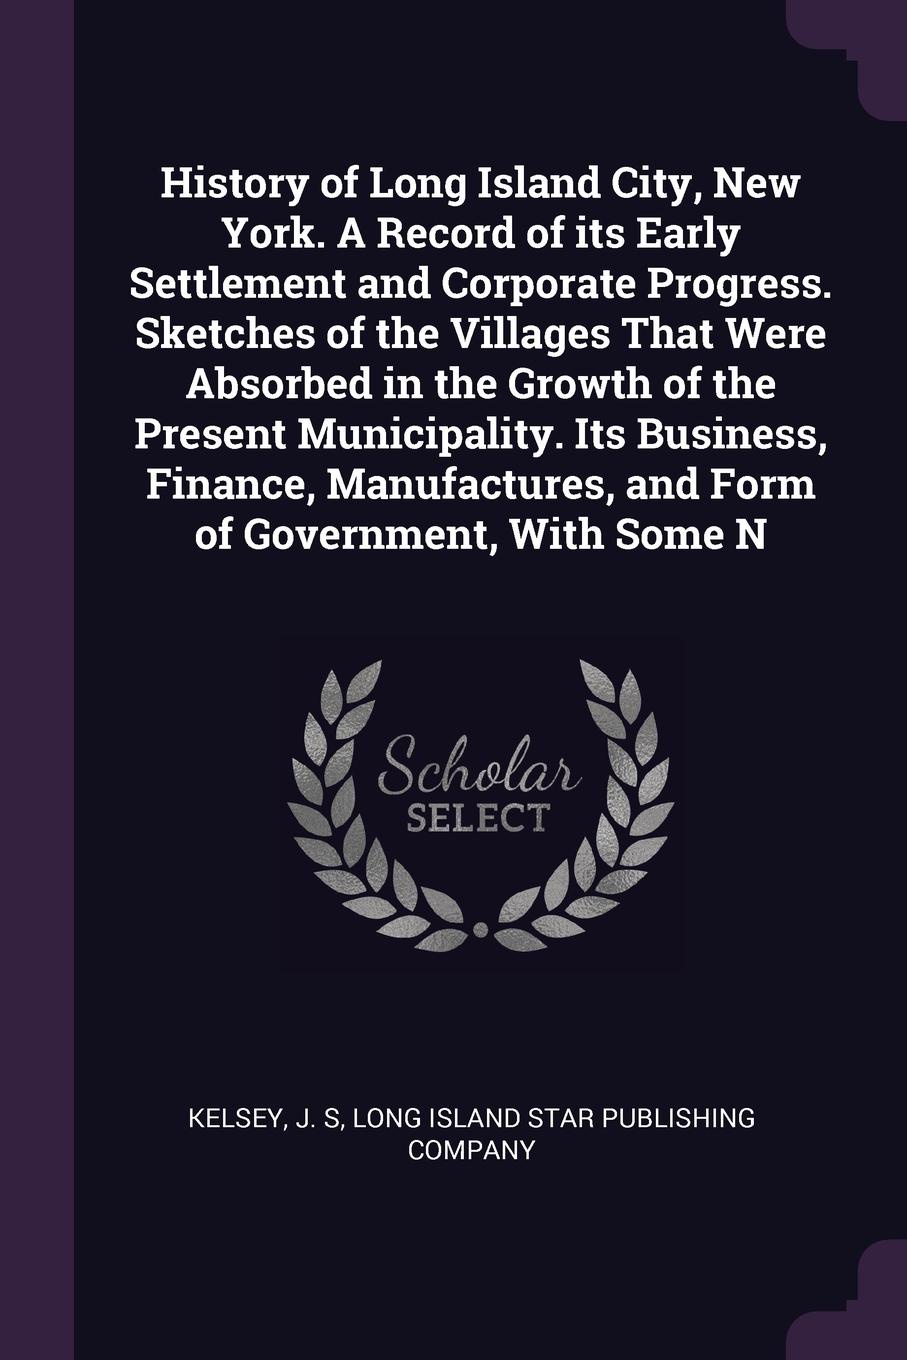 History of Long Island City, New York. A Record of its Early Settlement and Corporate Progress. Sketches of the Villages That Were Absorbed in the Growth of the Present Municipality. Its Business, Finance, Manufactures, and Form of Government, Wit...